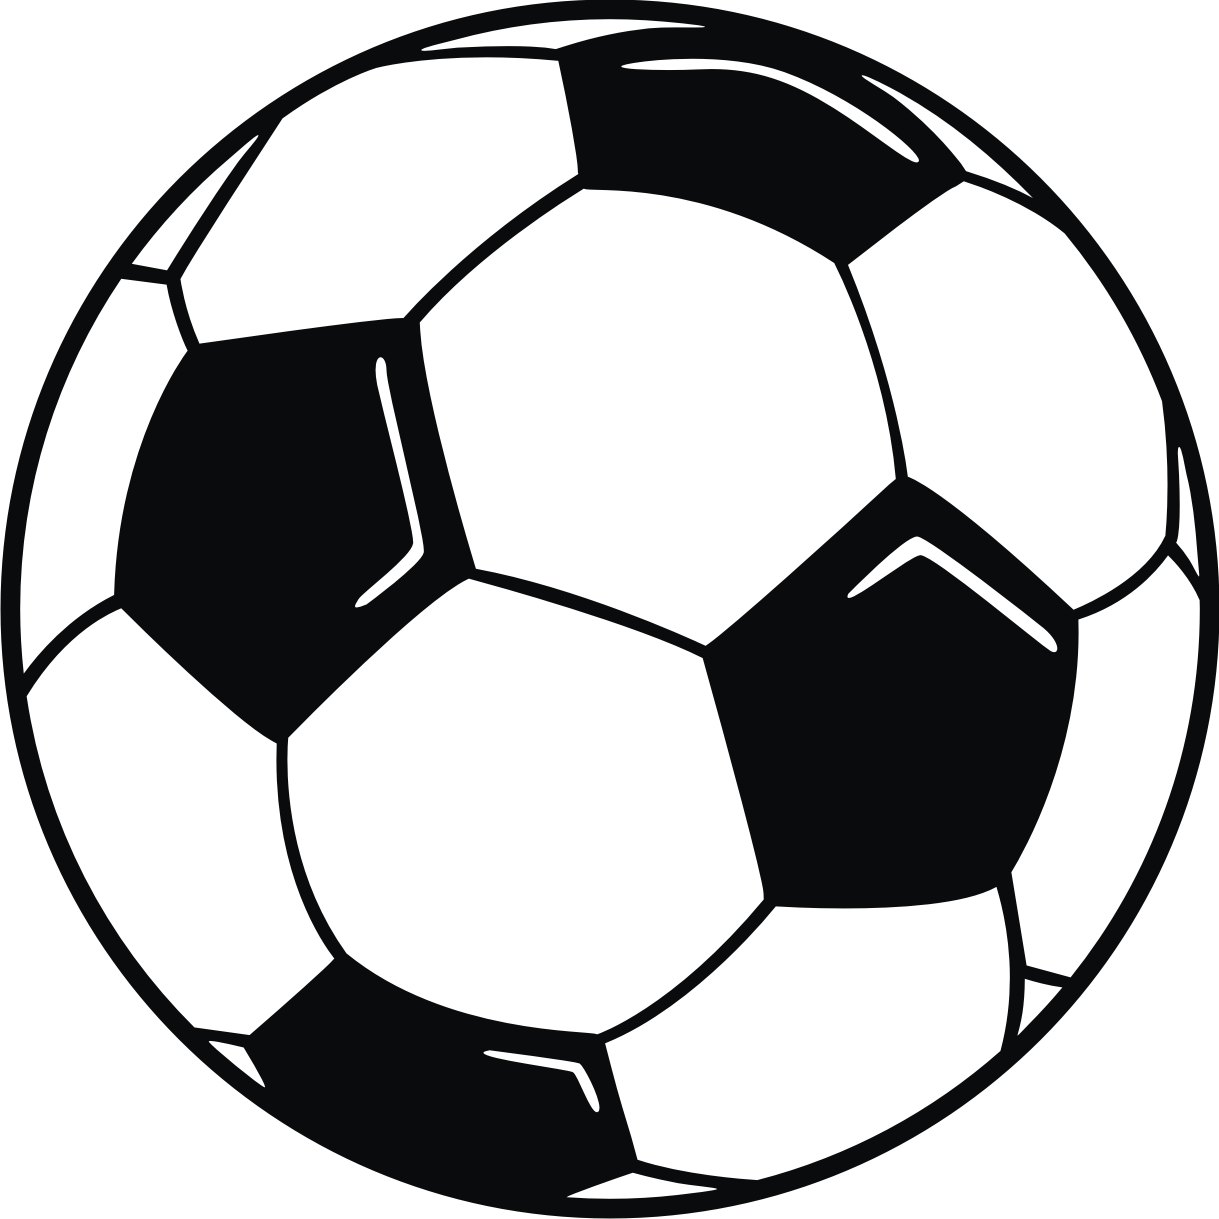 Soccer ball clip art free large images 2